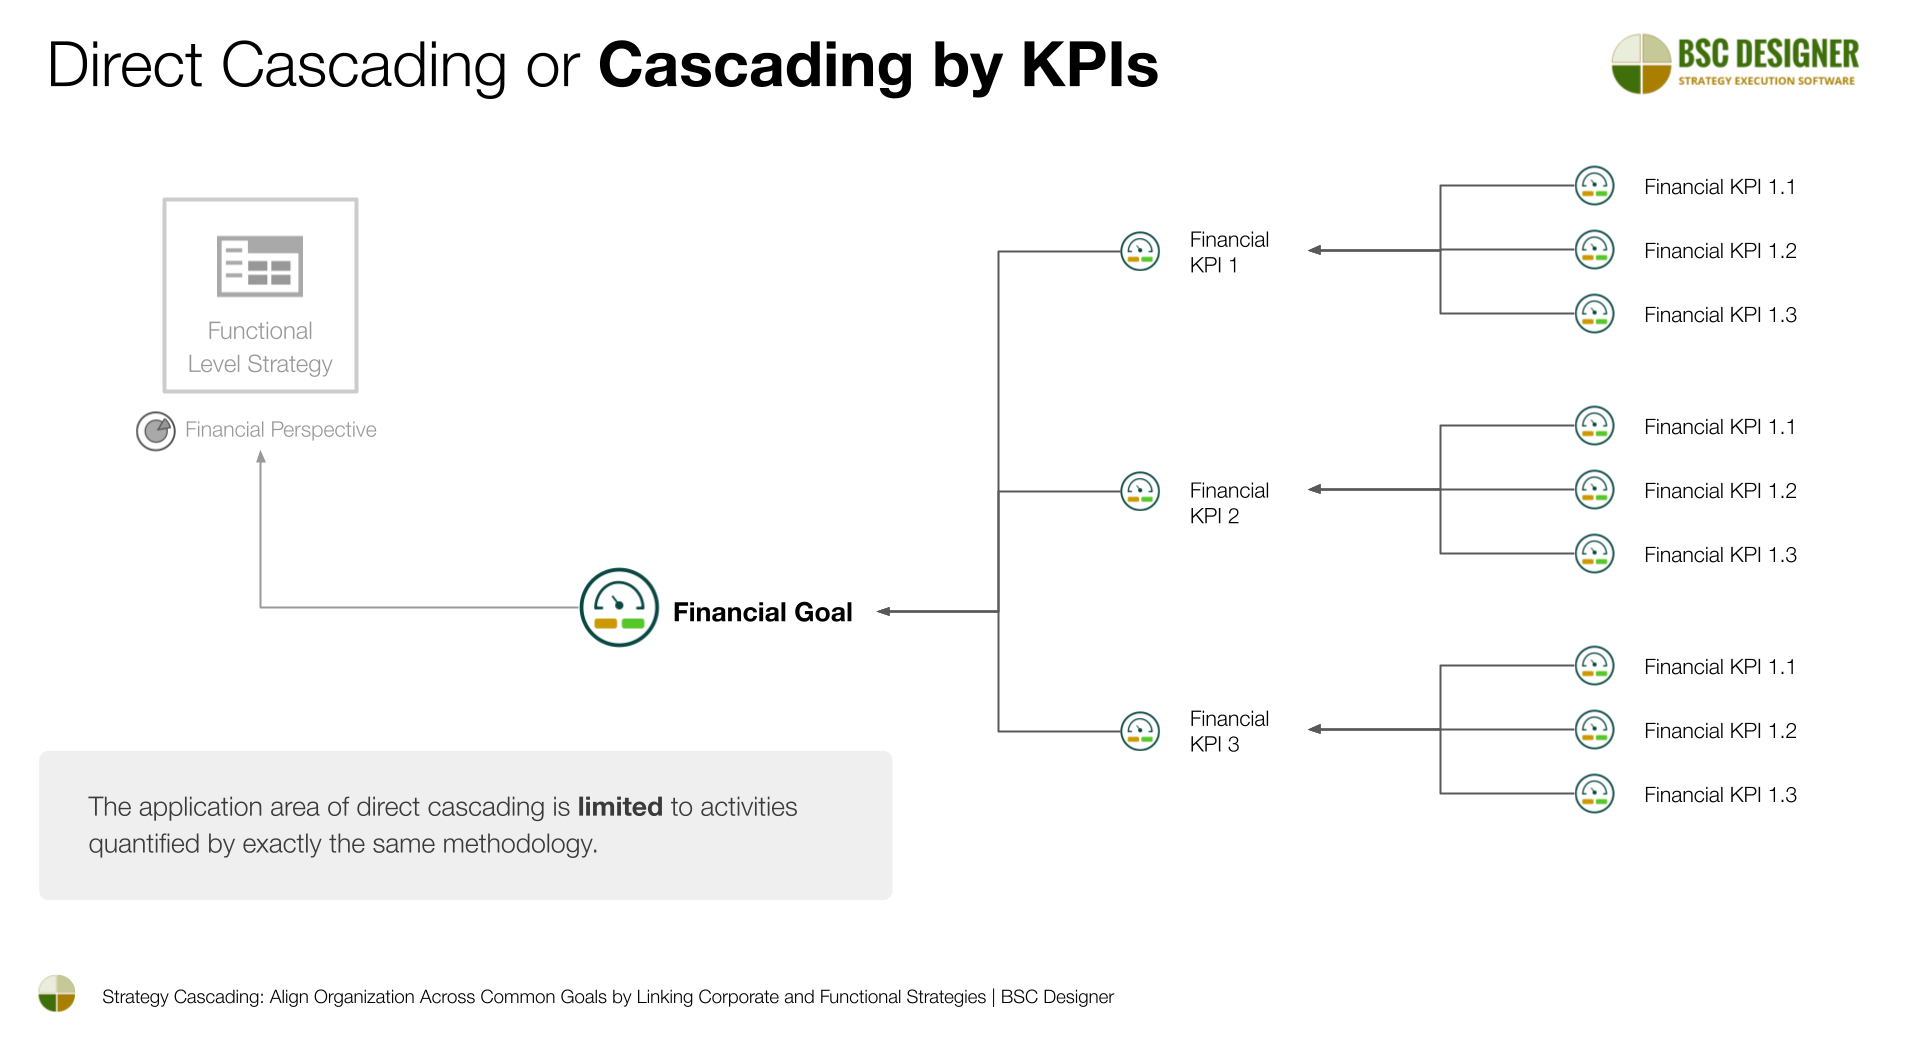 Cascading Method 3: Direct Cascading or Cascading by KPIs